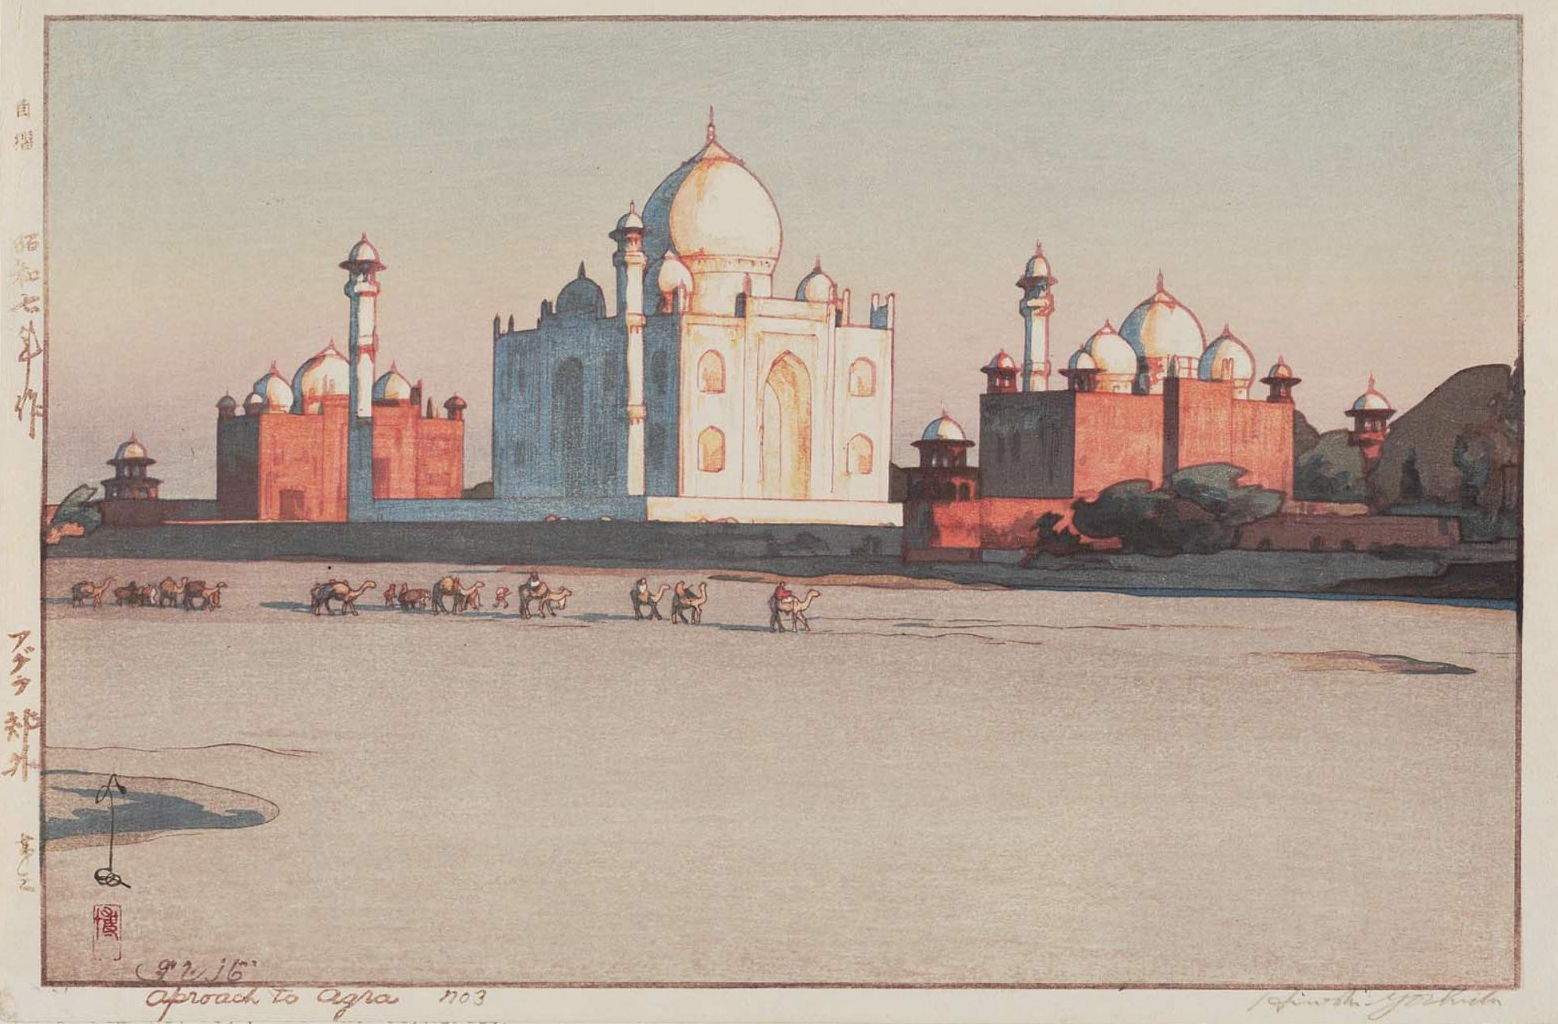 Approach to Agra, No. 3 woodblock print